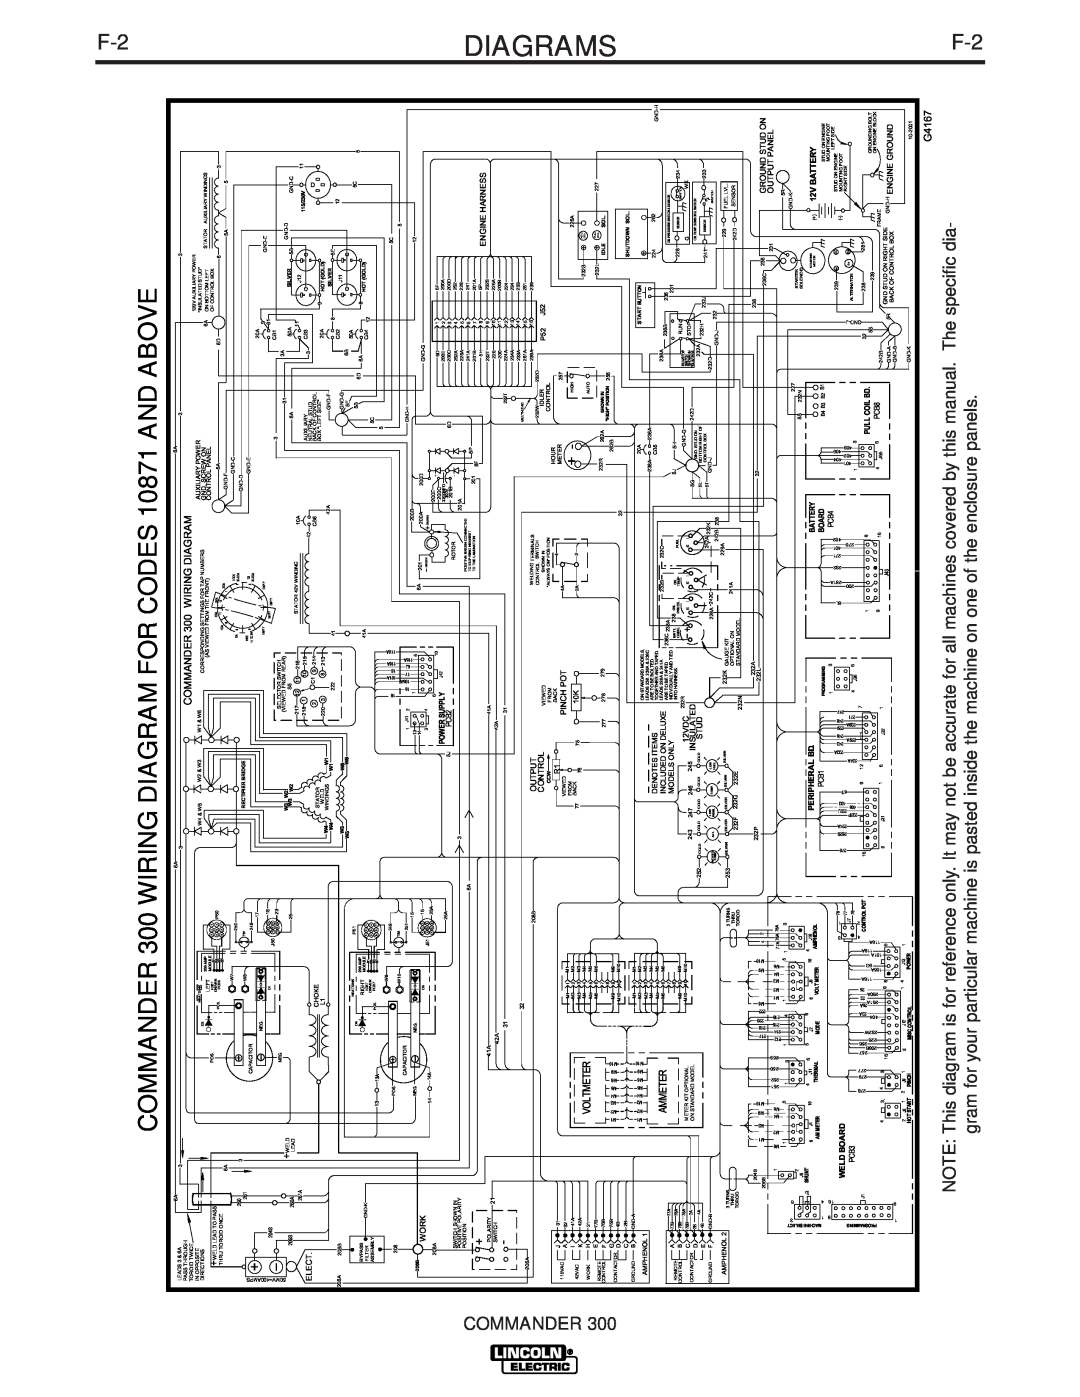 Lincoln Electric IM700-D Diagrams, COMMANDER 300 WIRING DIAGRAM FOR CODES 10871 AND ABOVE, Commander, Voltmeter, Ammeter 